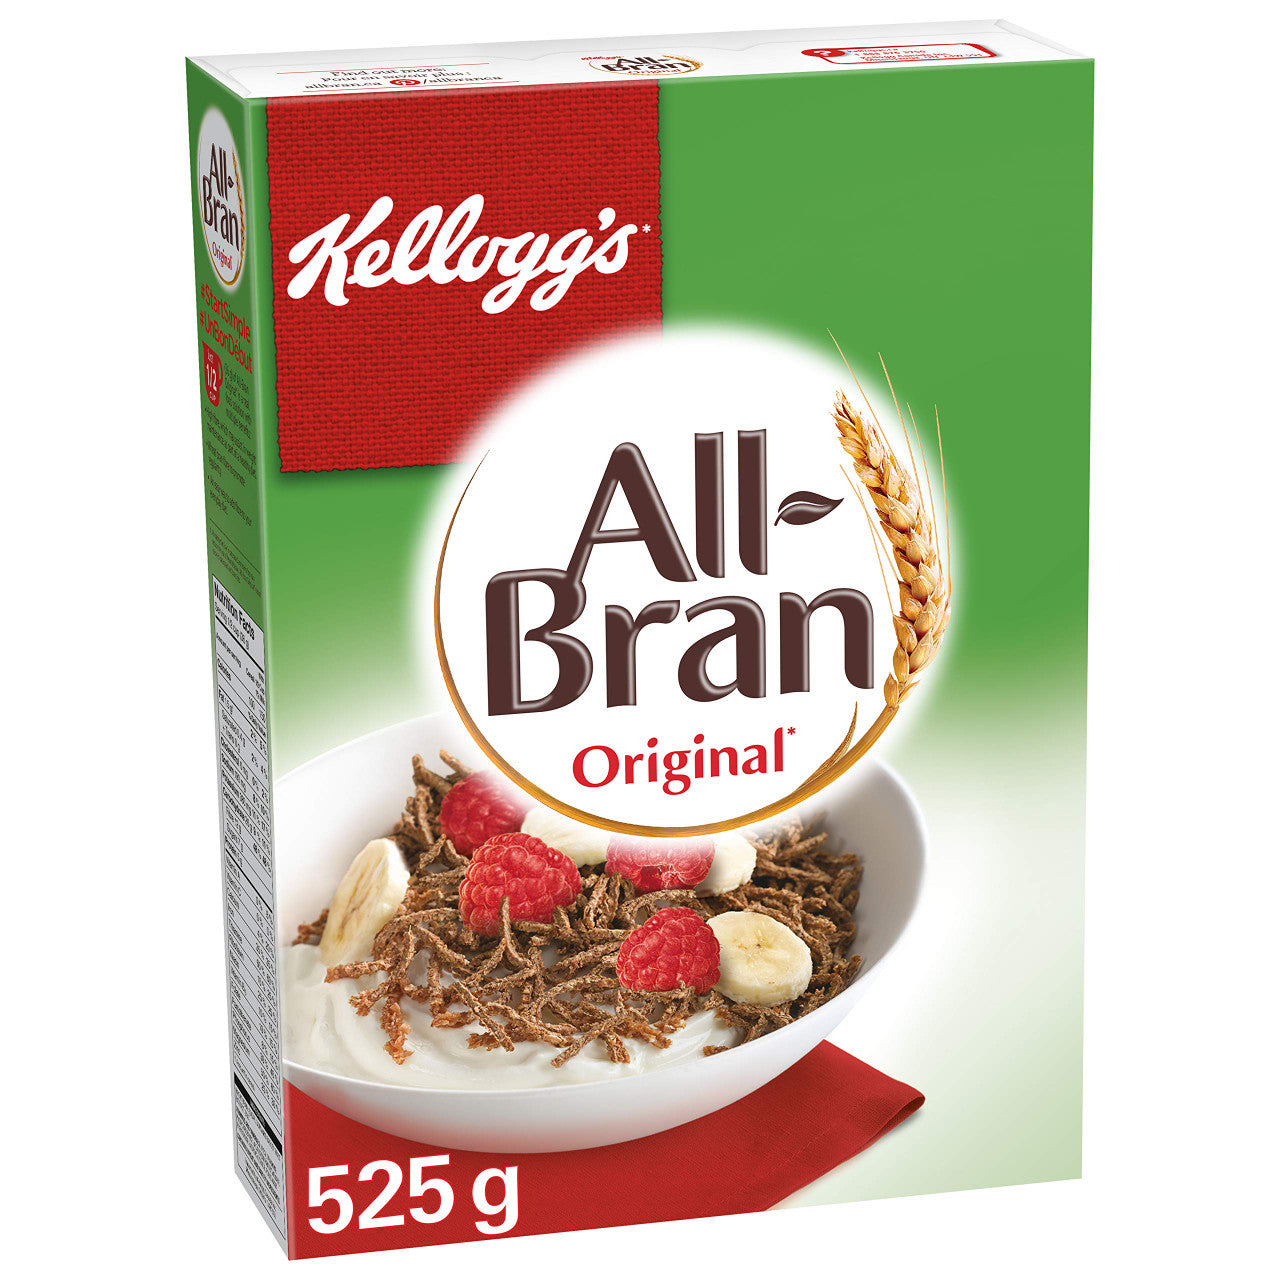 Kellogg's All Bran Original Cereal, 525g/18.5oz, (Imported from Canada)